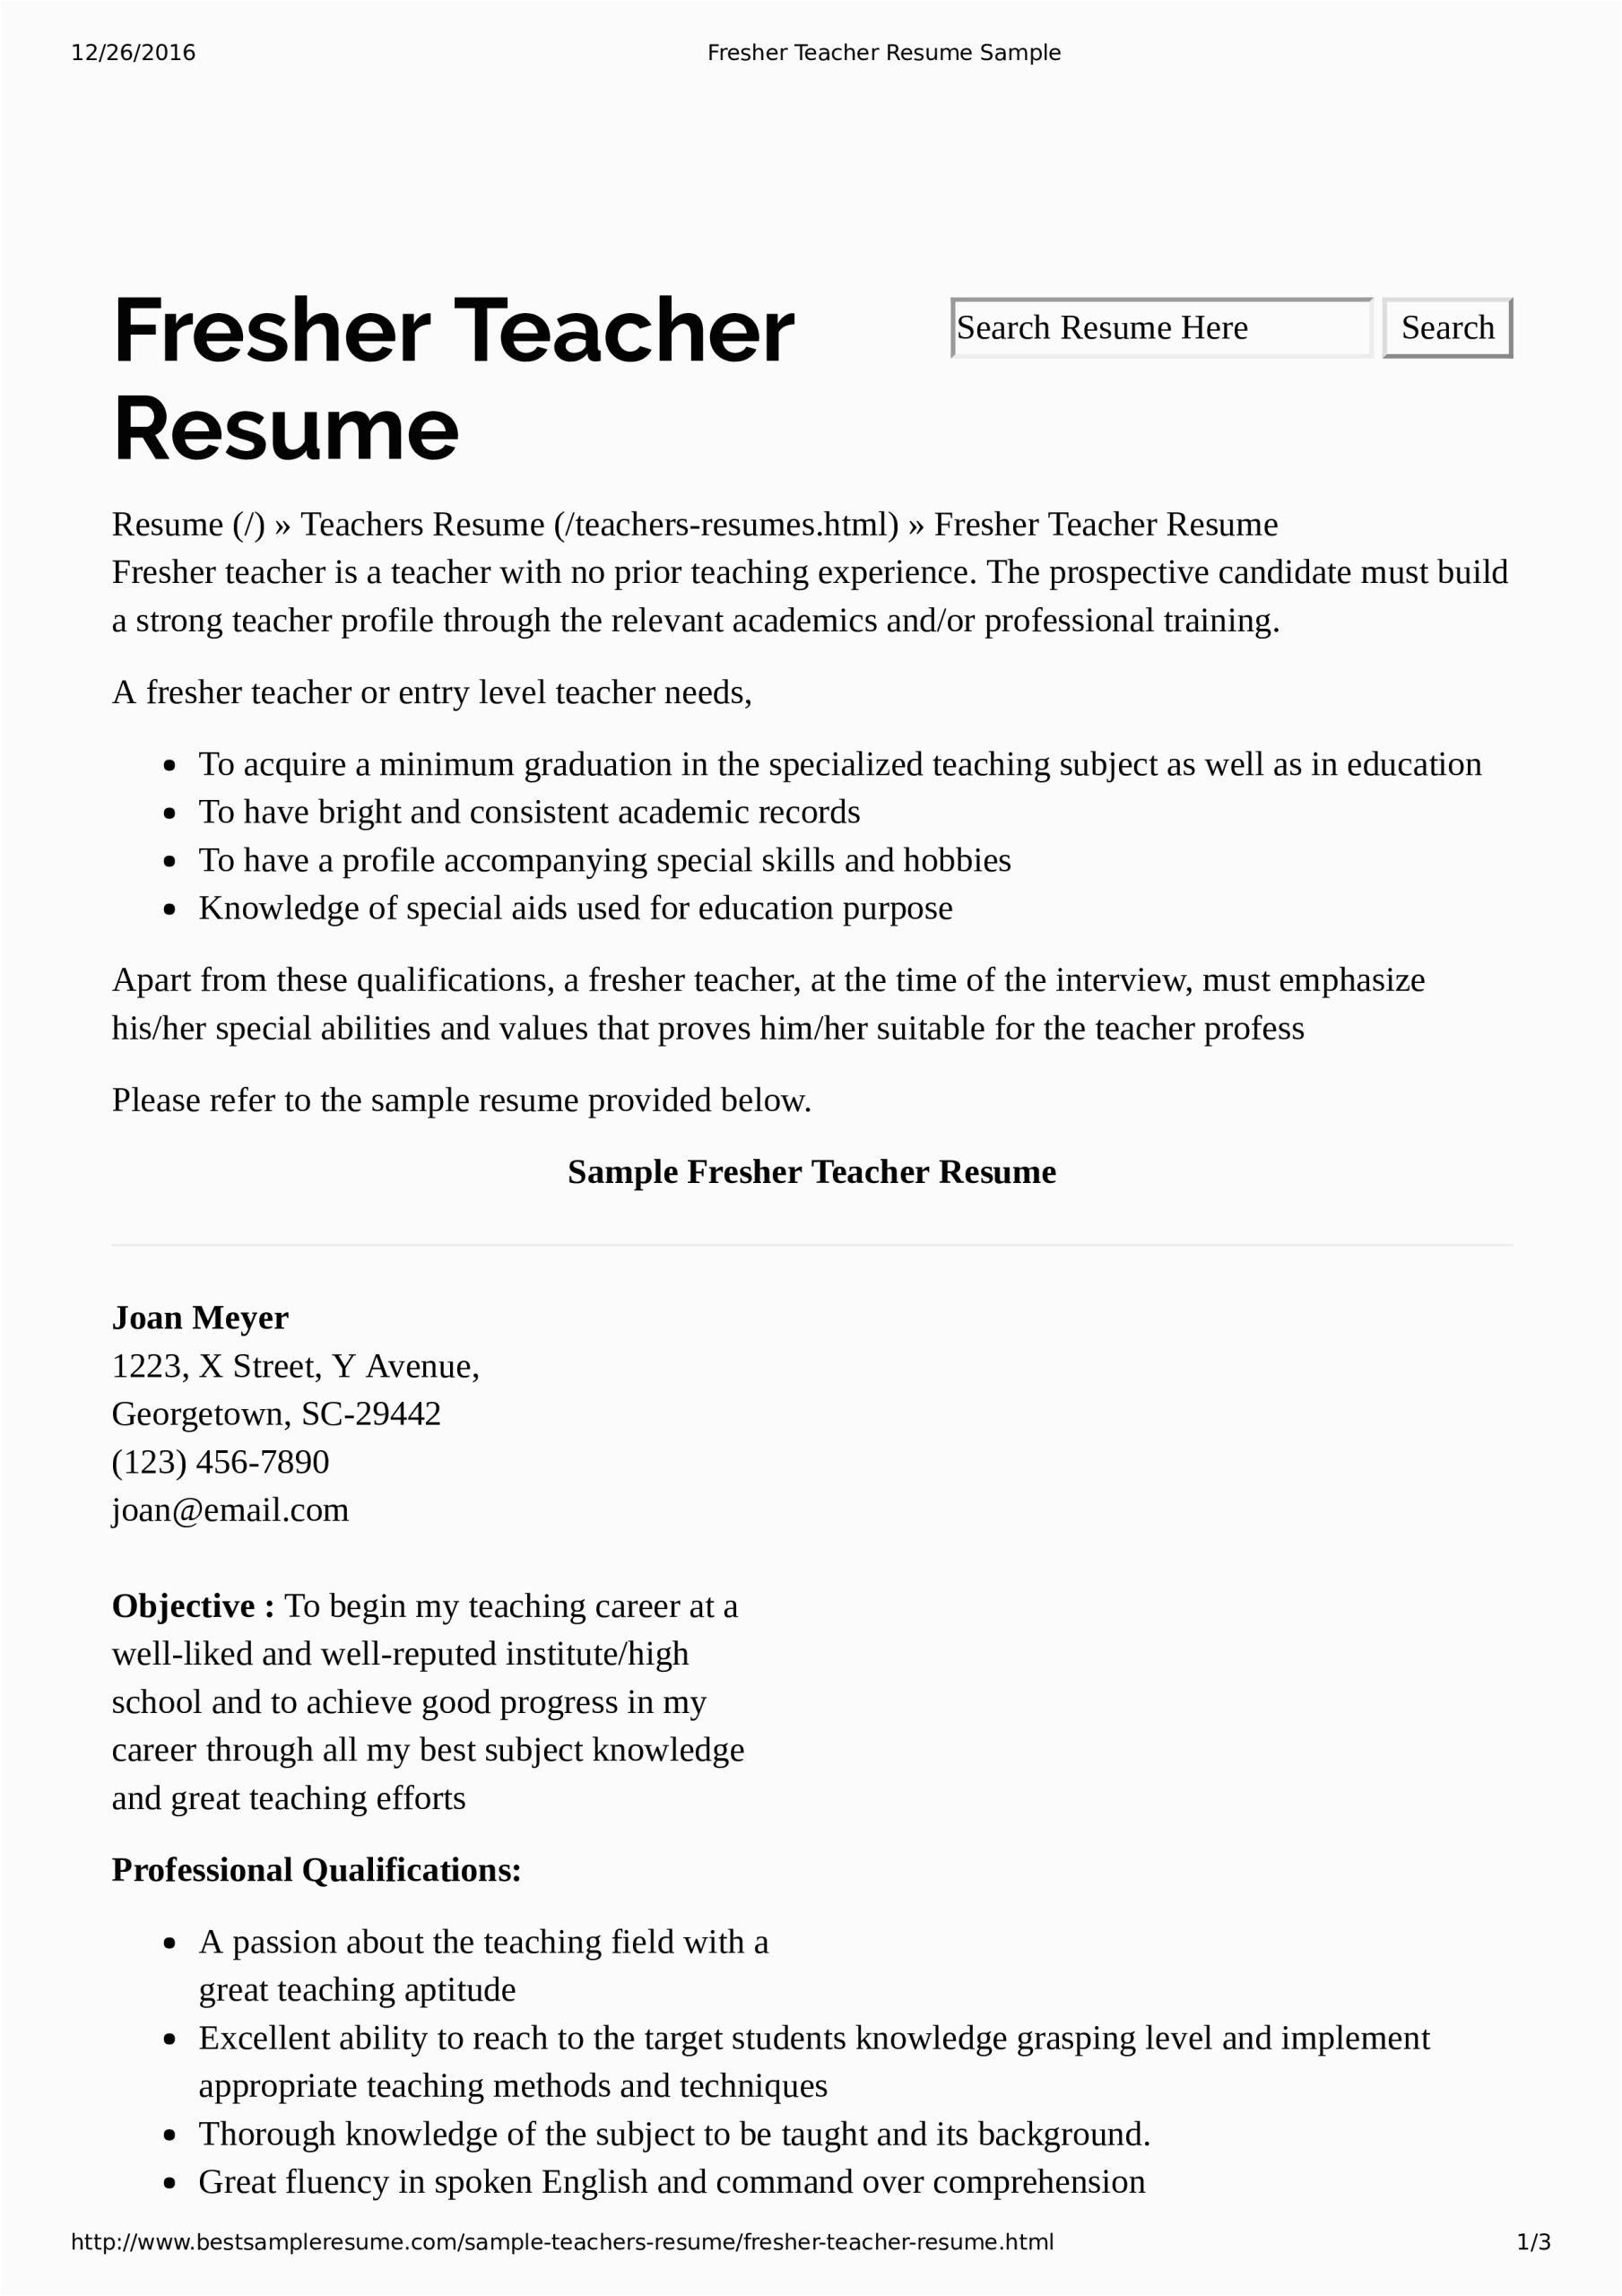 Sample Resume format for Students with No Experience Preschool Teacher Resume with No Experience